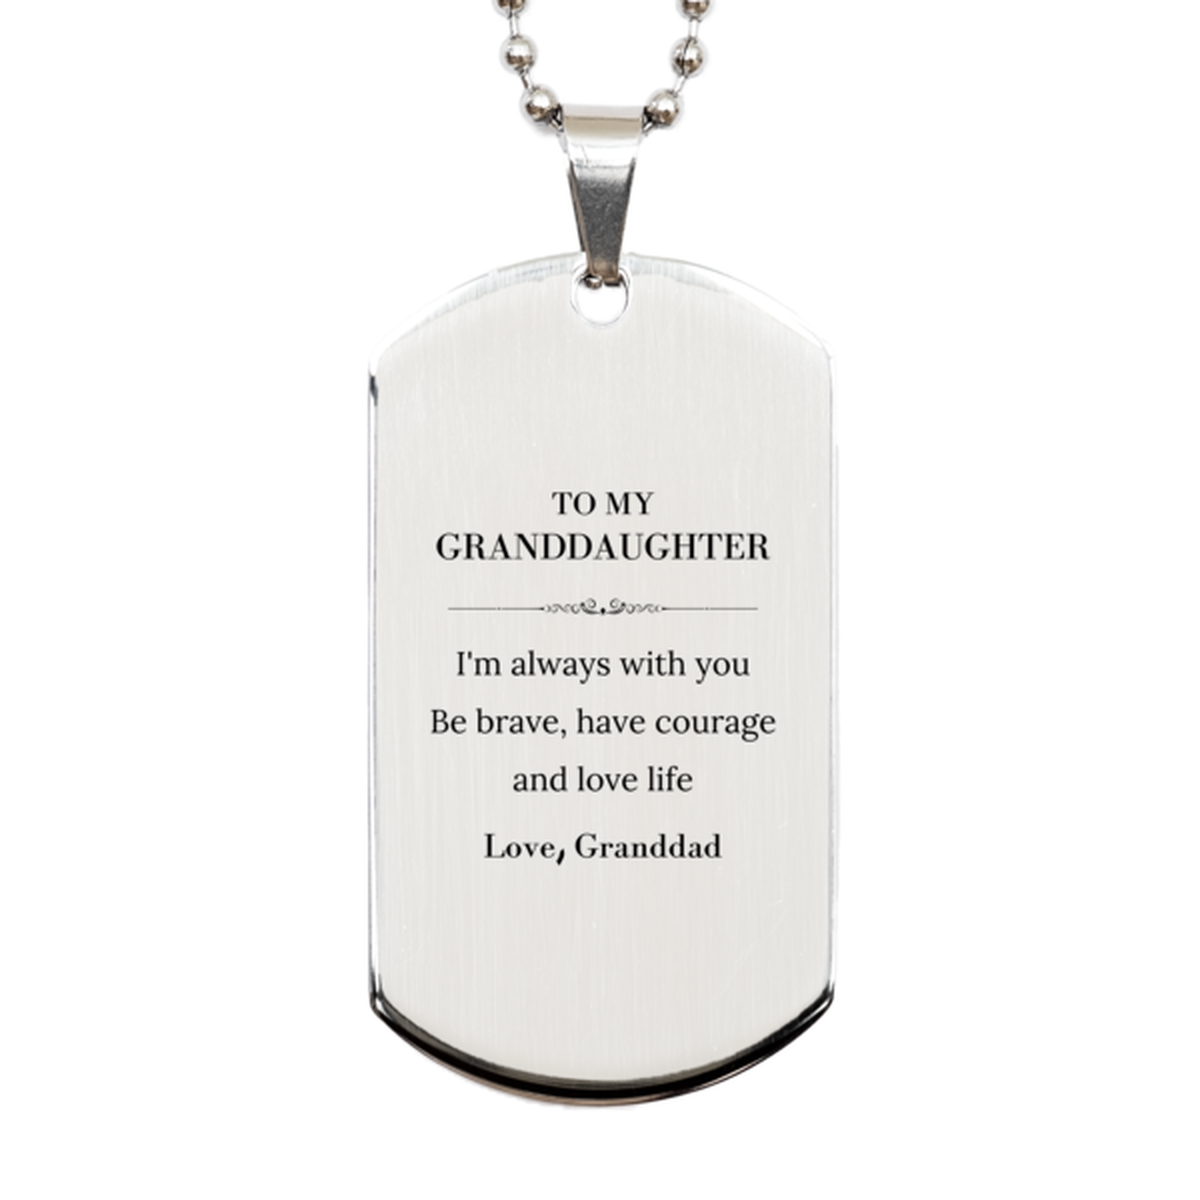 To My Granddaughter Gifts from Granddad, Unique Silver Dog Tag Inspirational Christmas Birthday Graduation Gifts for Granddaughter I'm always with you. Be brave, have courage and love life. Love, Granddad